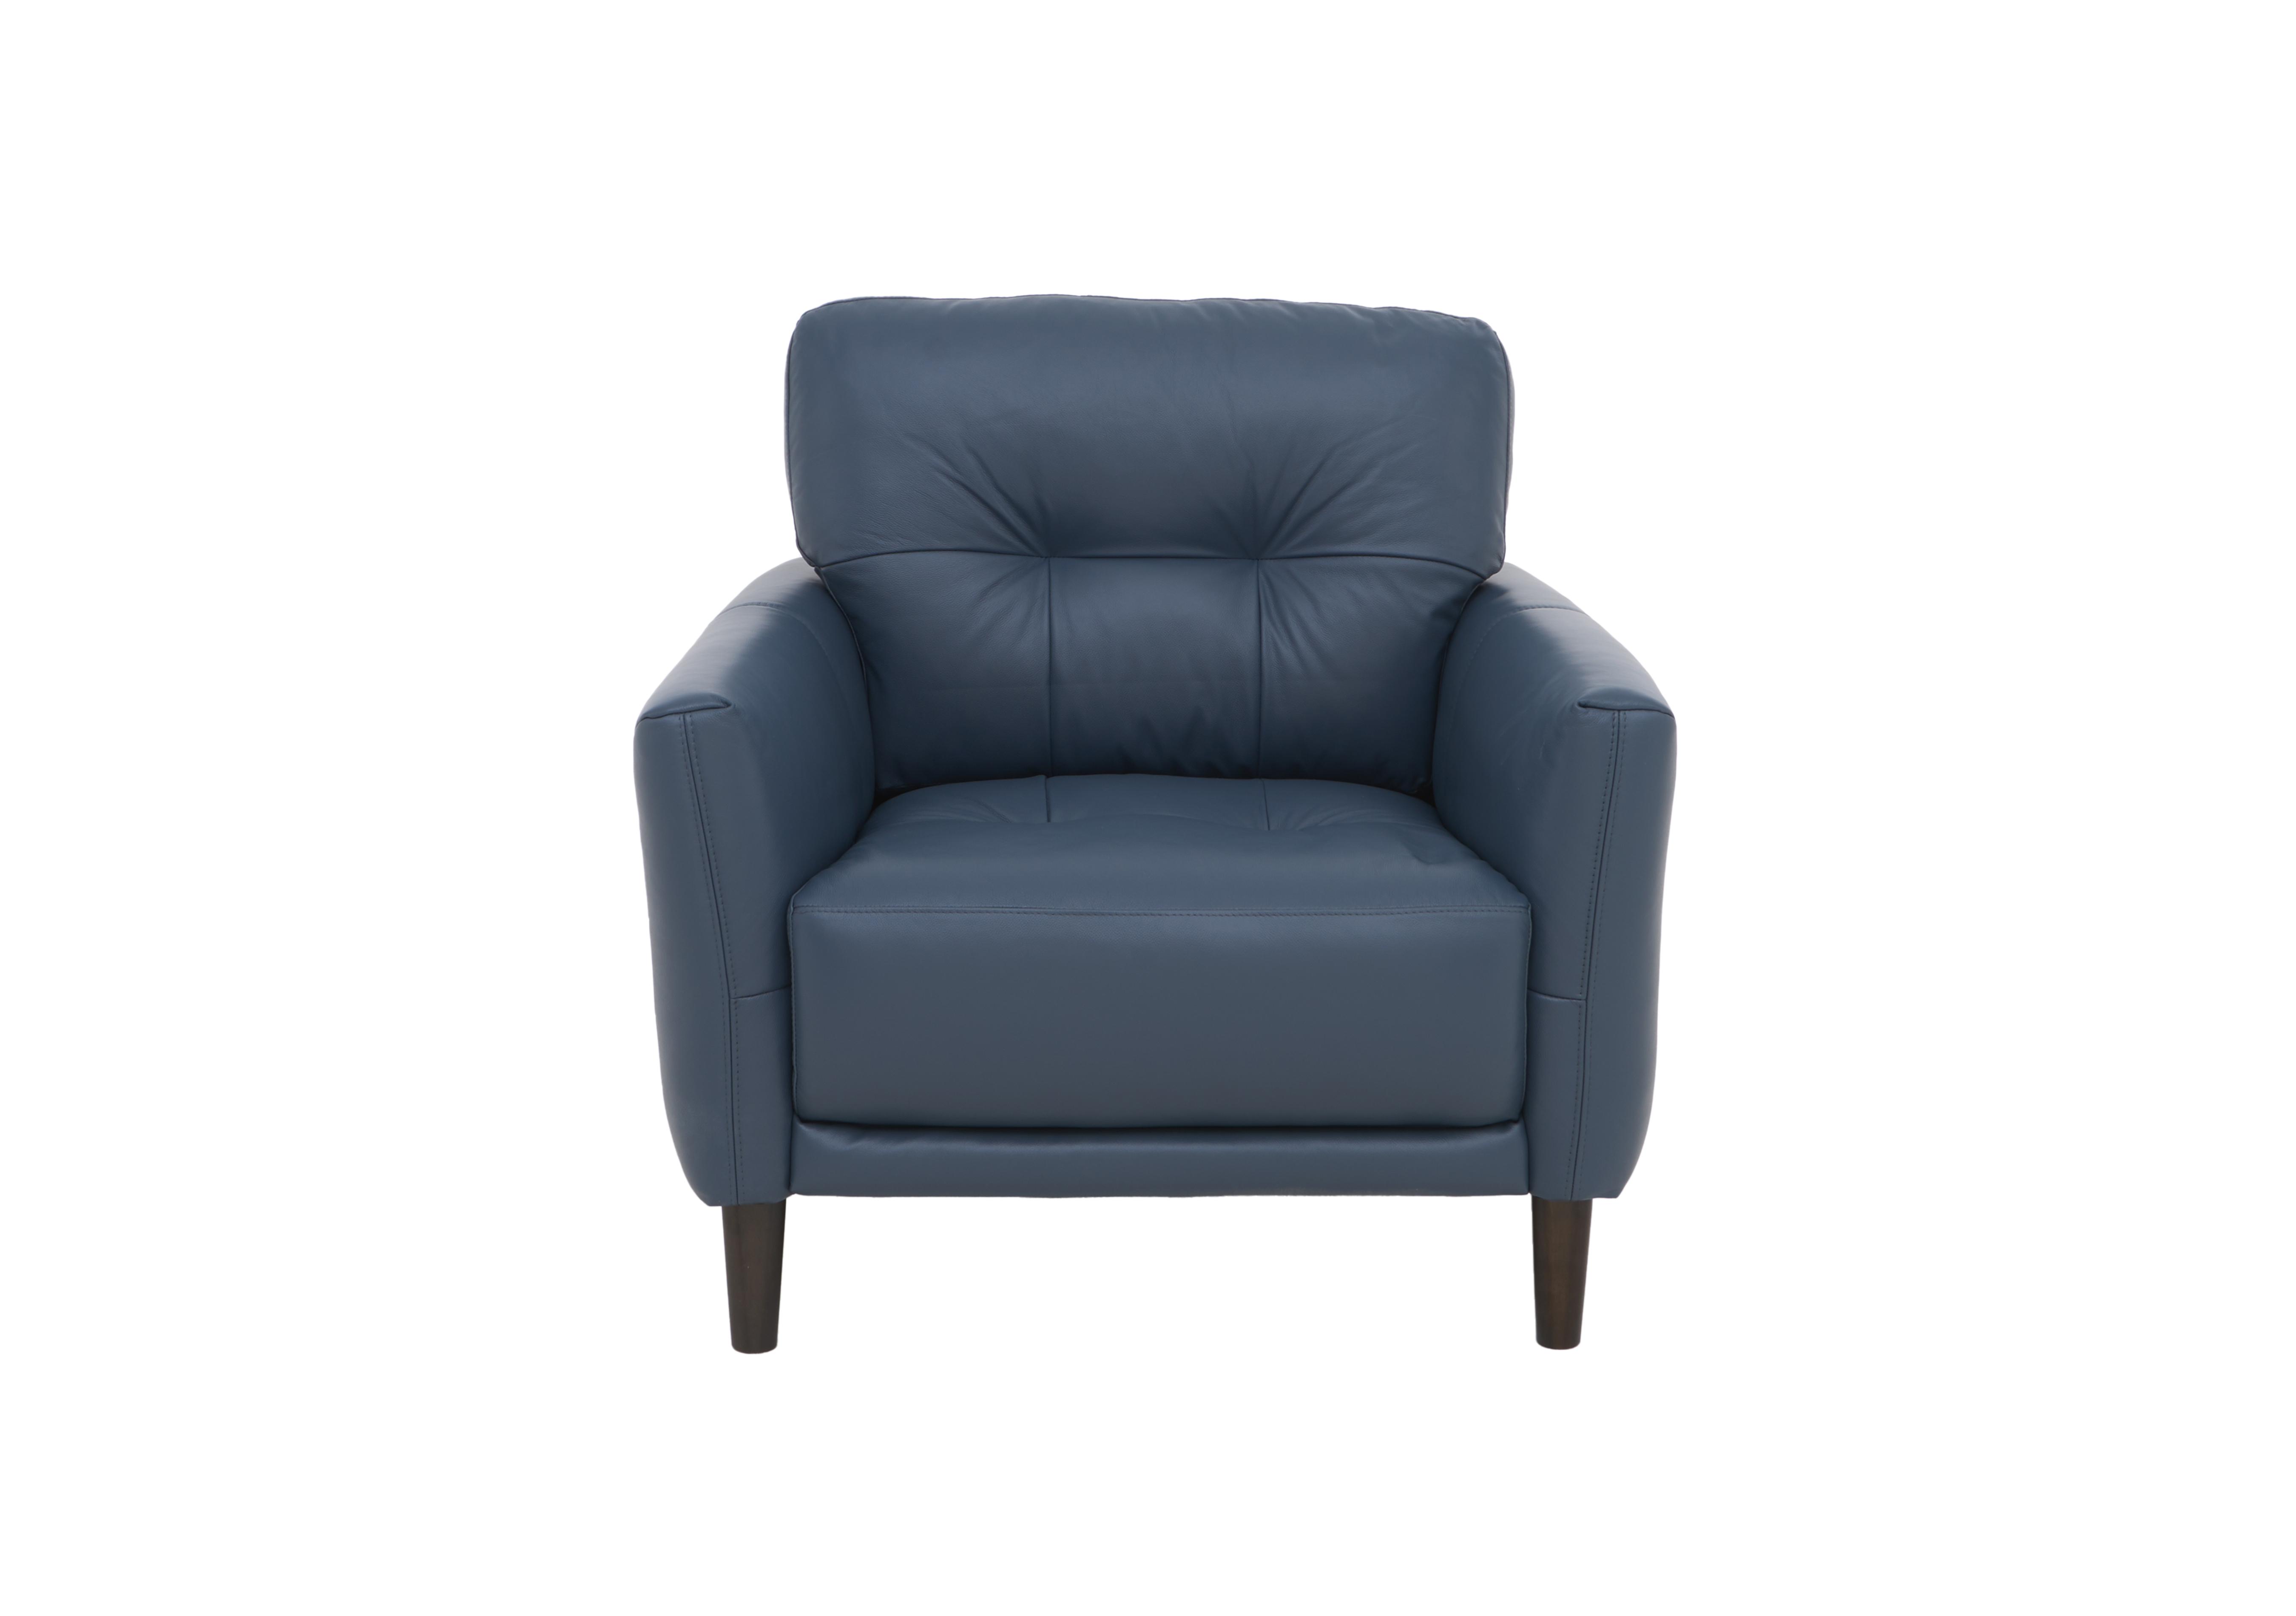 Uno Leather Chair in Bv-313e Ocean Blue on Furniture Village